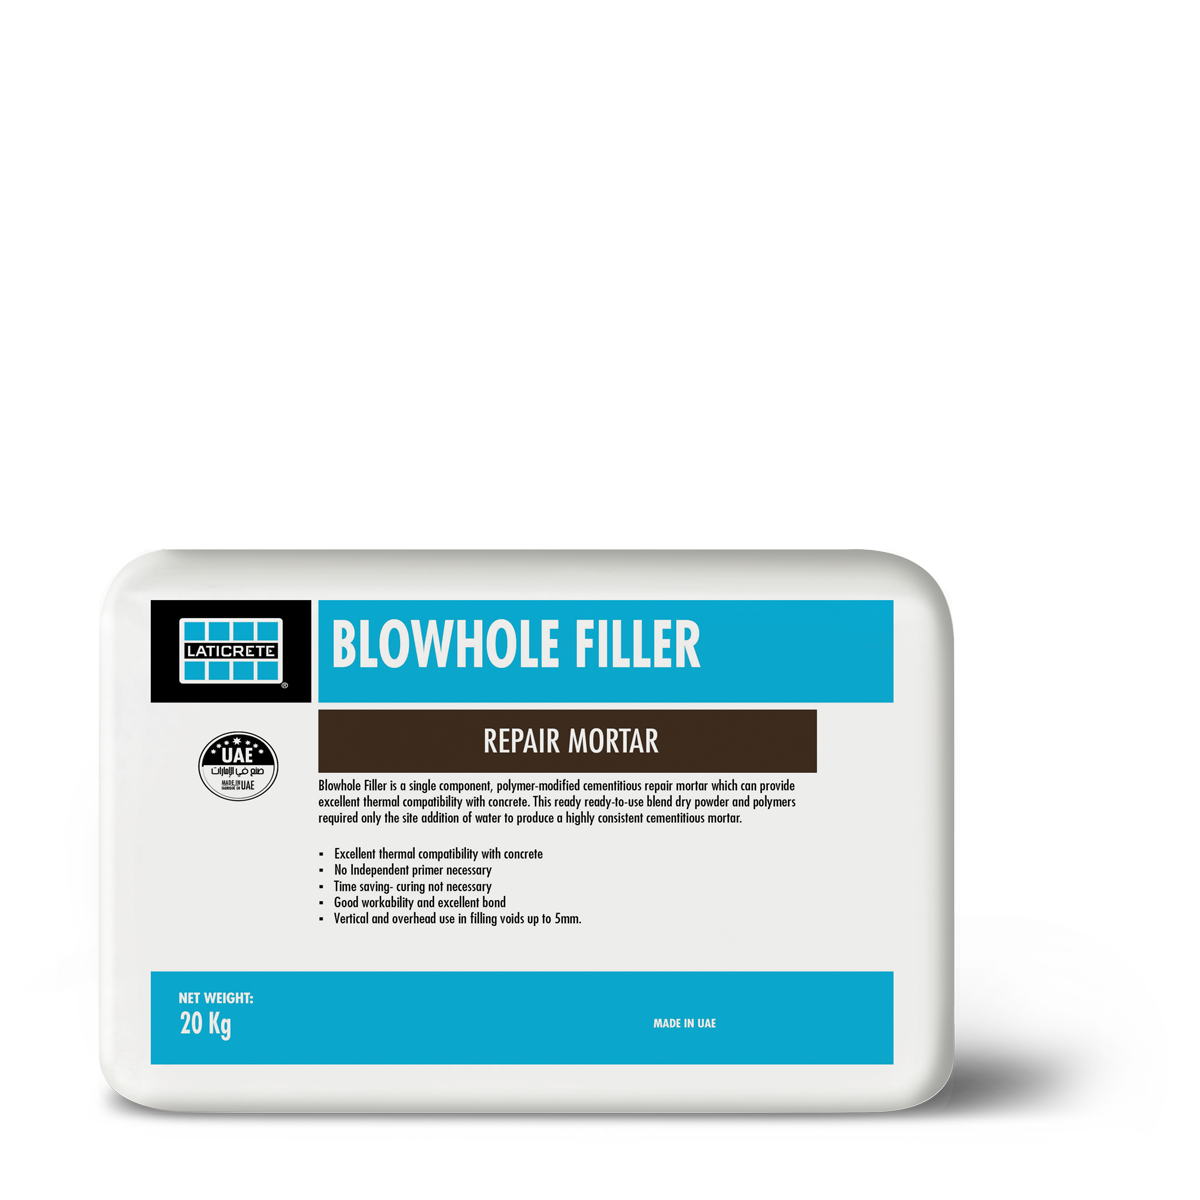 BLOWHOLE FILLER